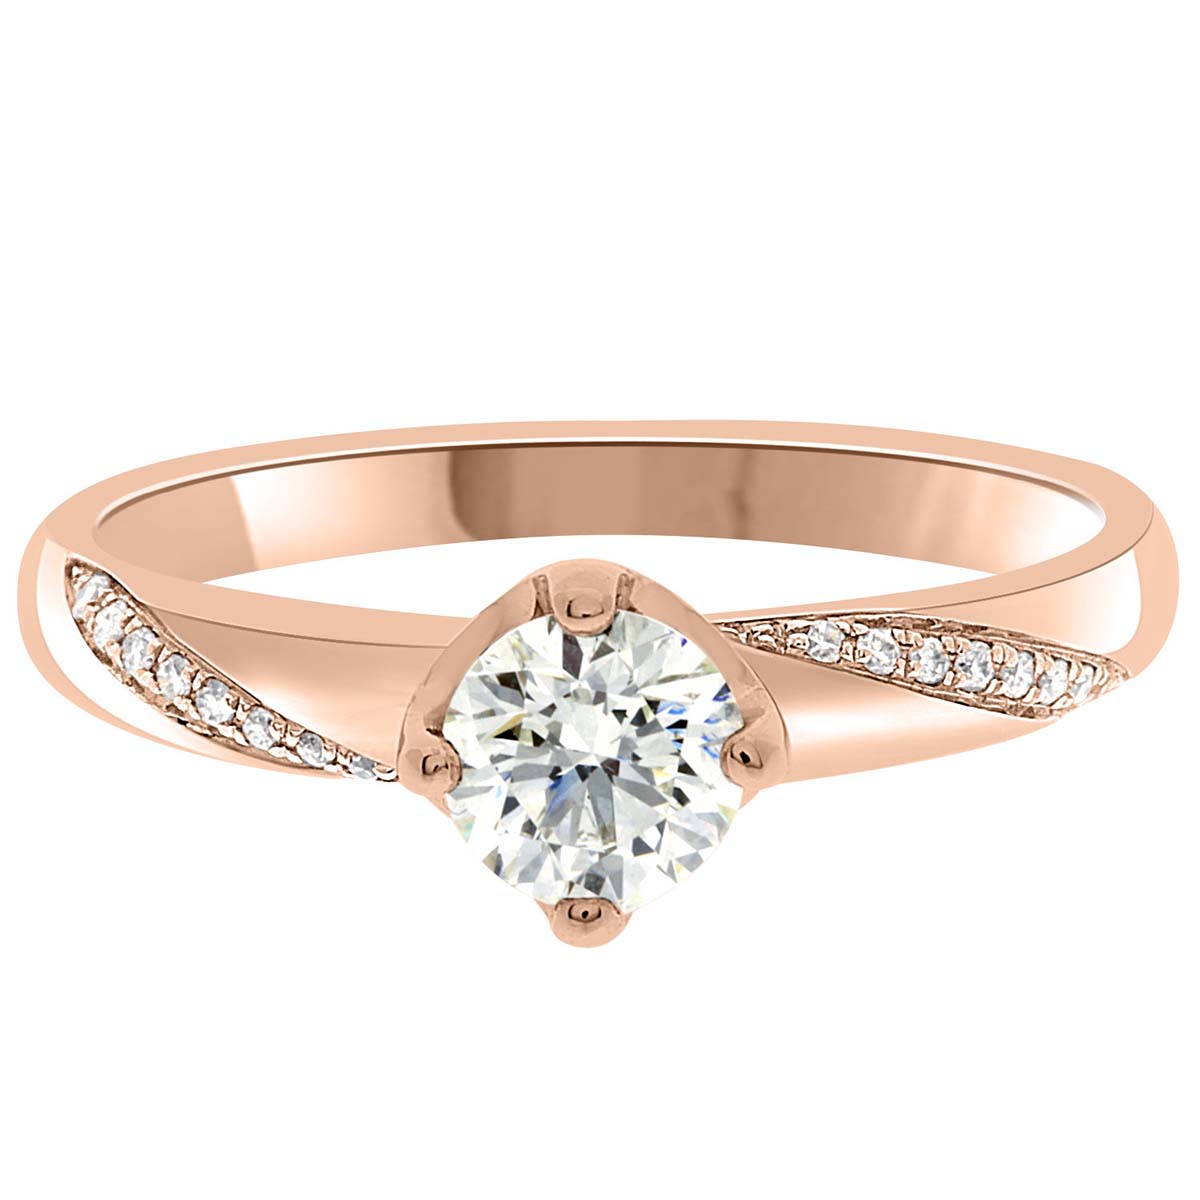 Crossover Band Engagement Ring made from rose gold